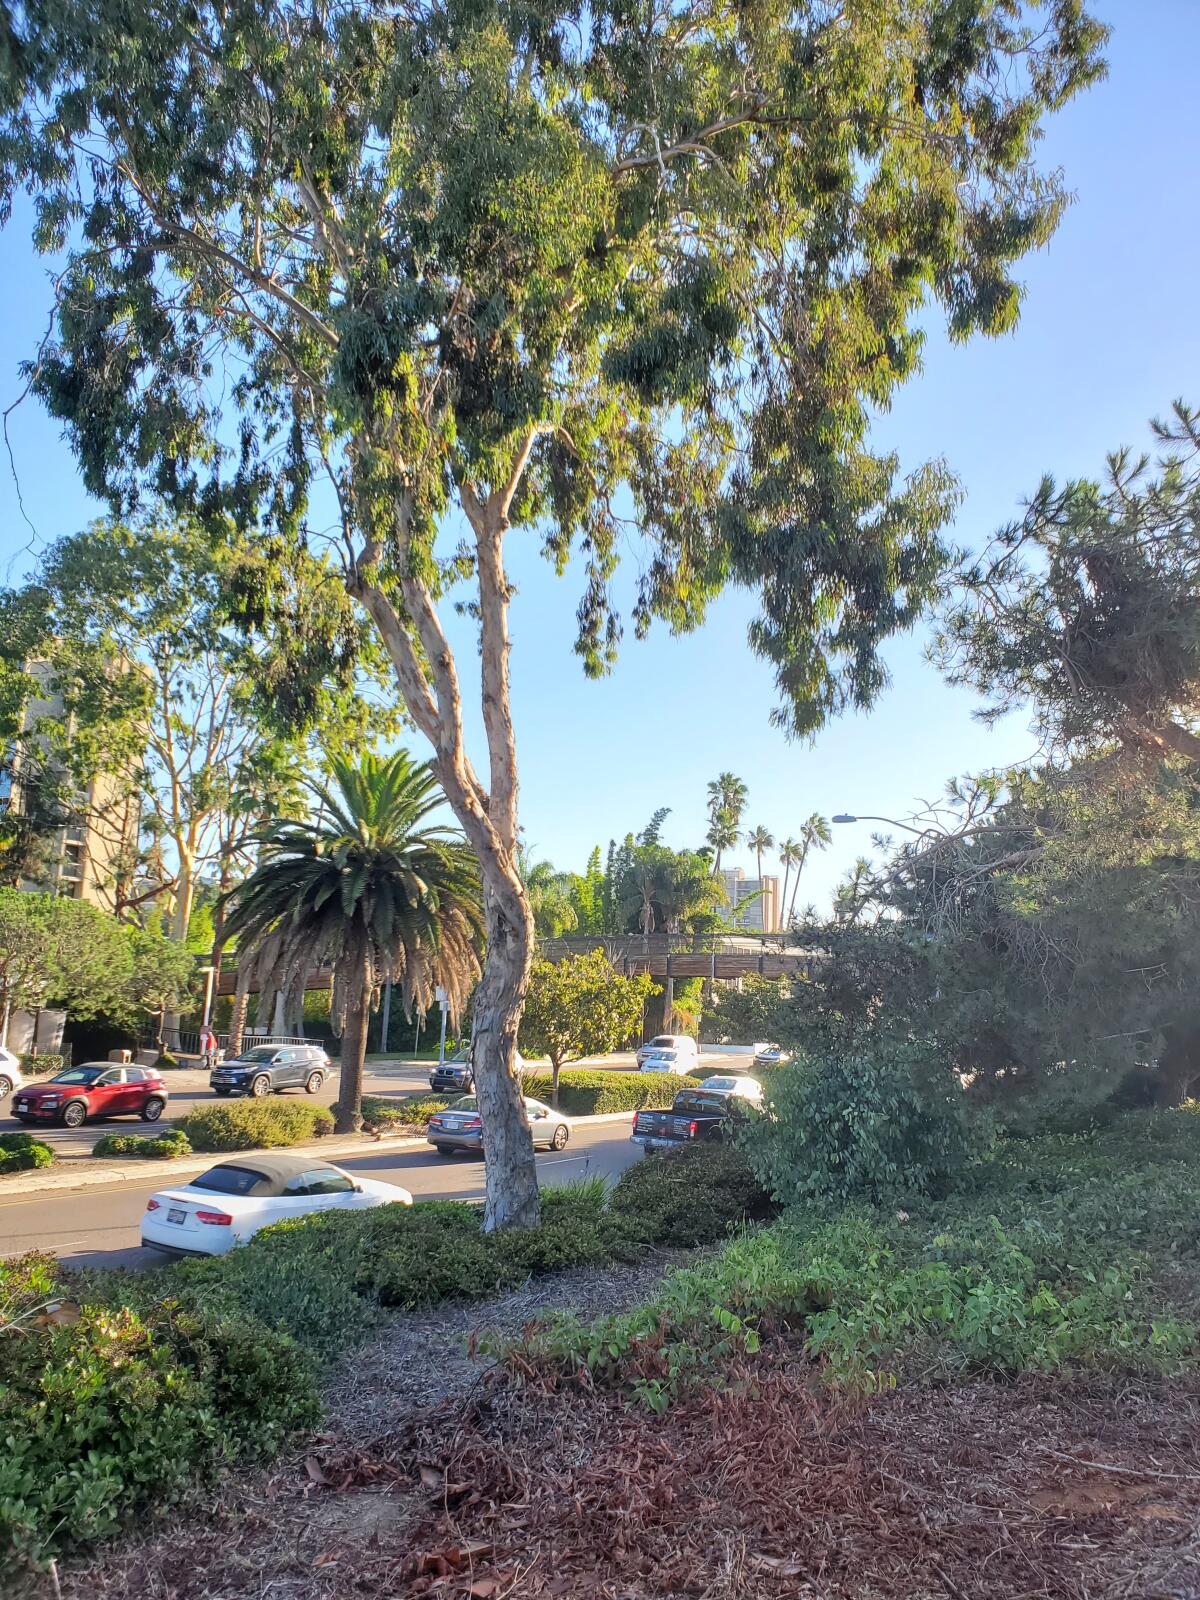 A eucalyptus tree was removed from this location along Torrey Pines Road, leaving one eucalyptus onsite.